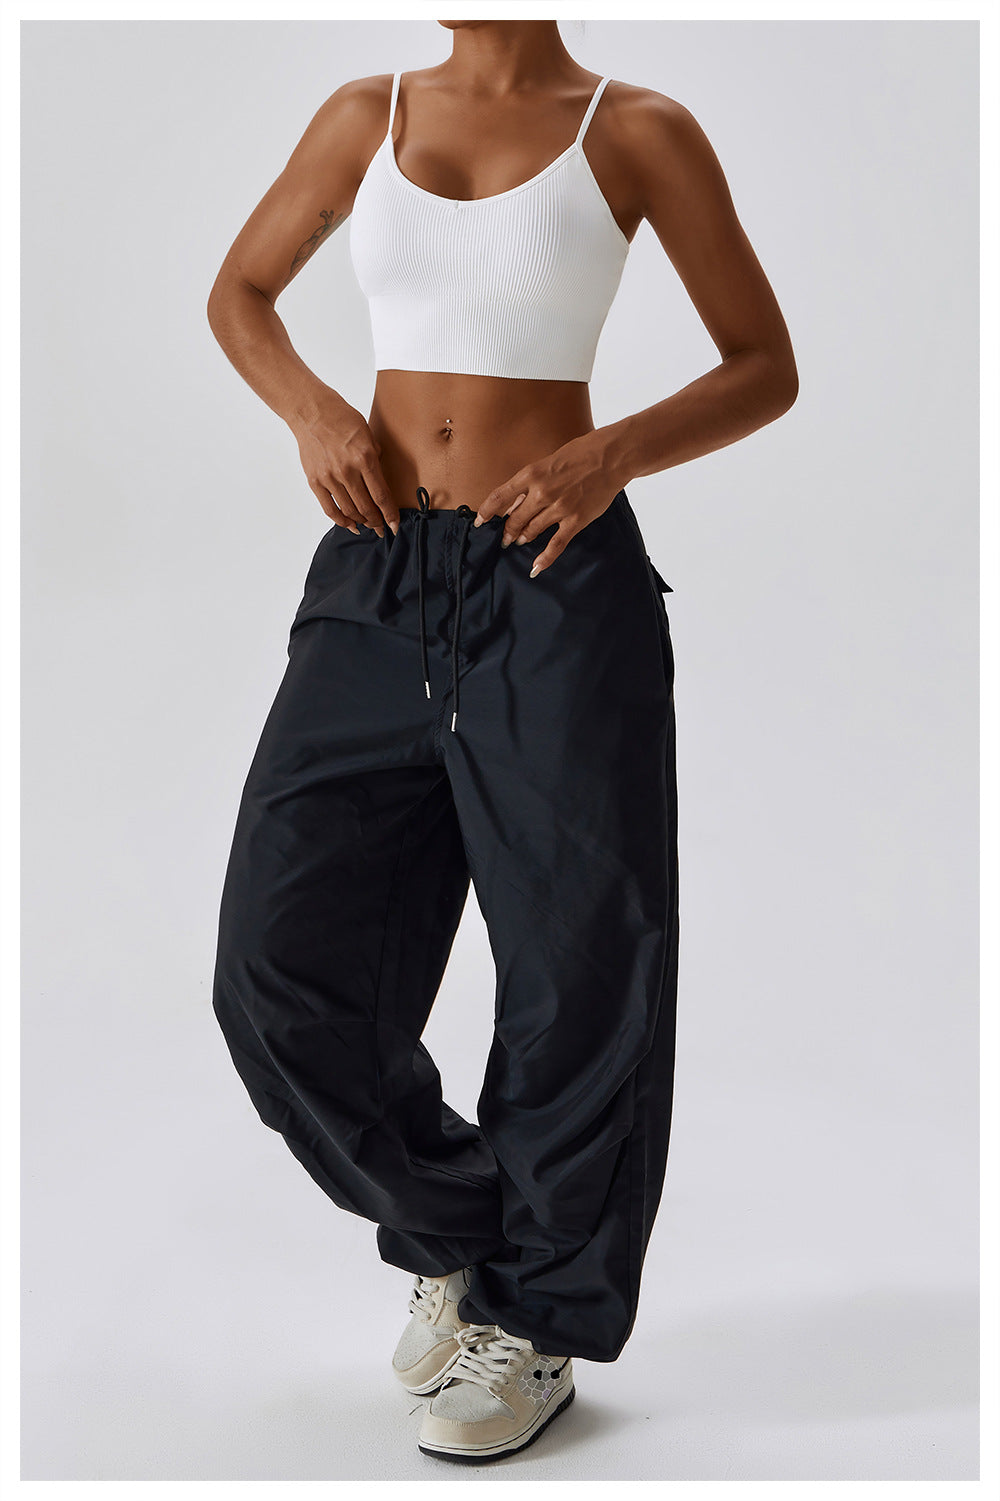 Summer high waist quick-drying sports pants women's legged pants American style loose straight casual pocket overalls women 8212